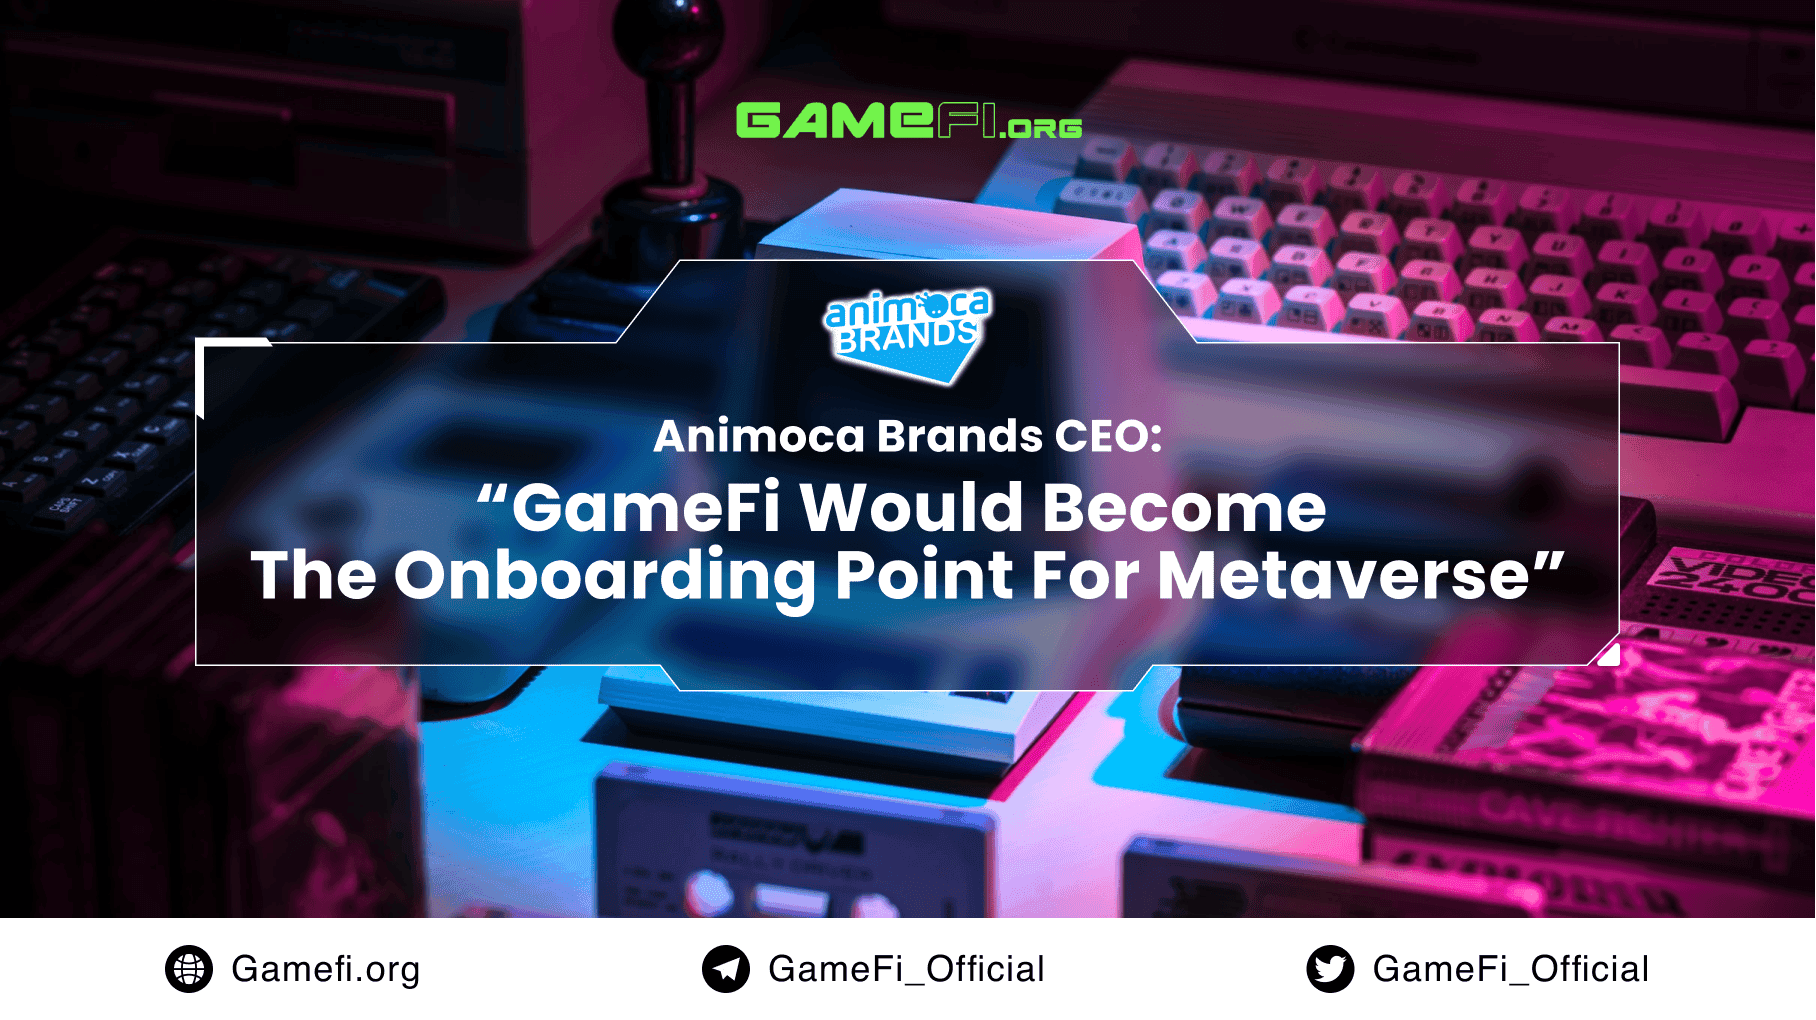 GameFi would become the onboarding point for Metaverse: Animoca Brands CEO